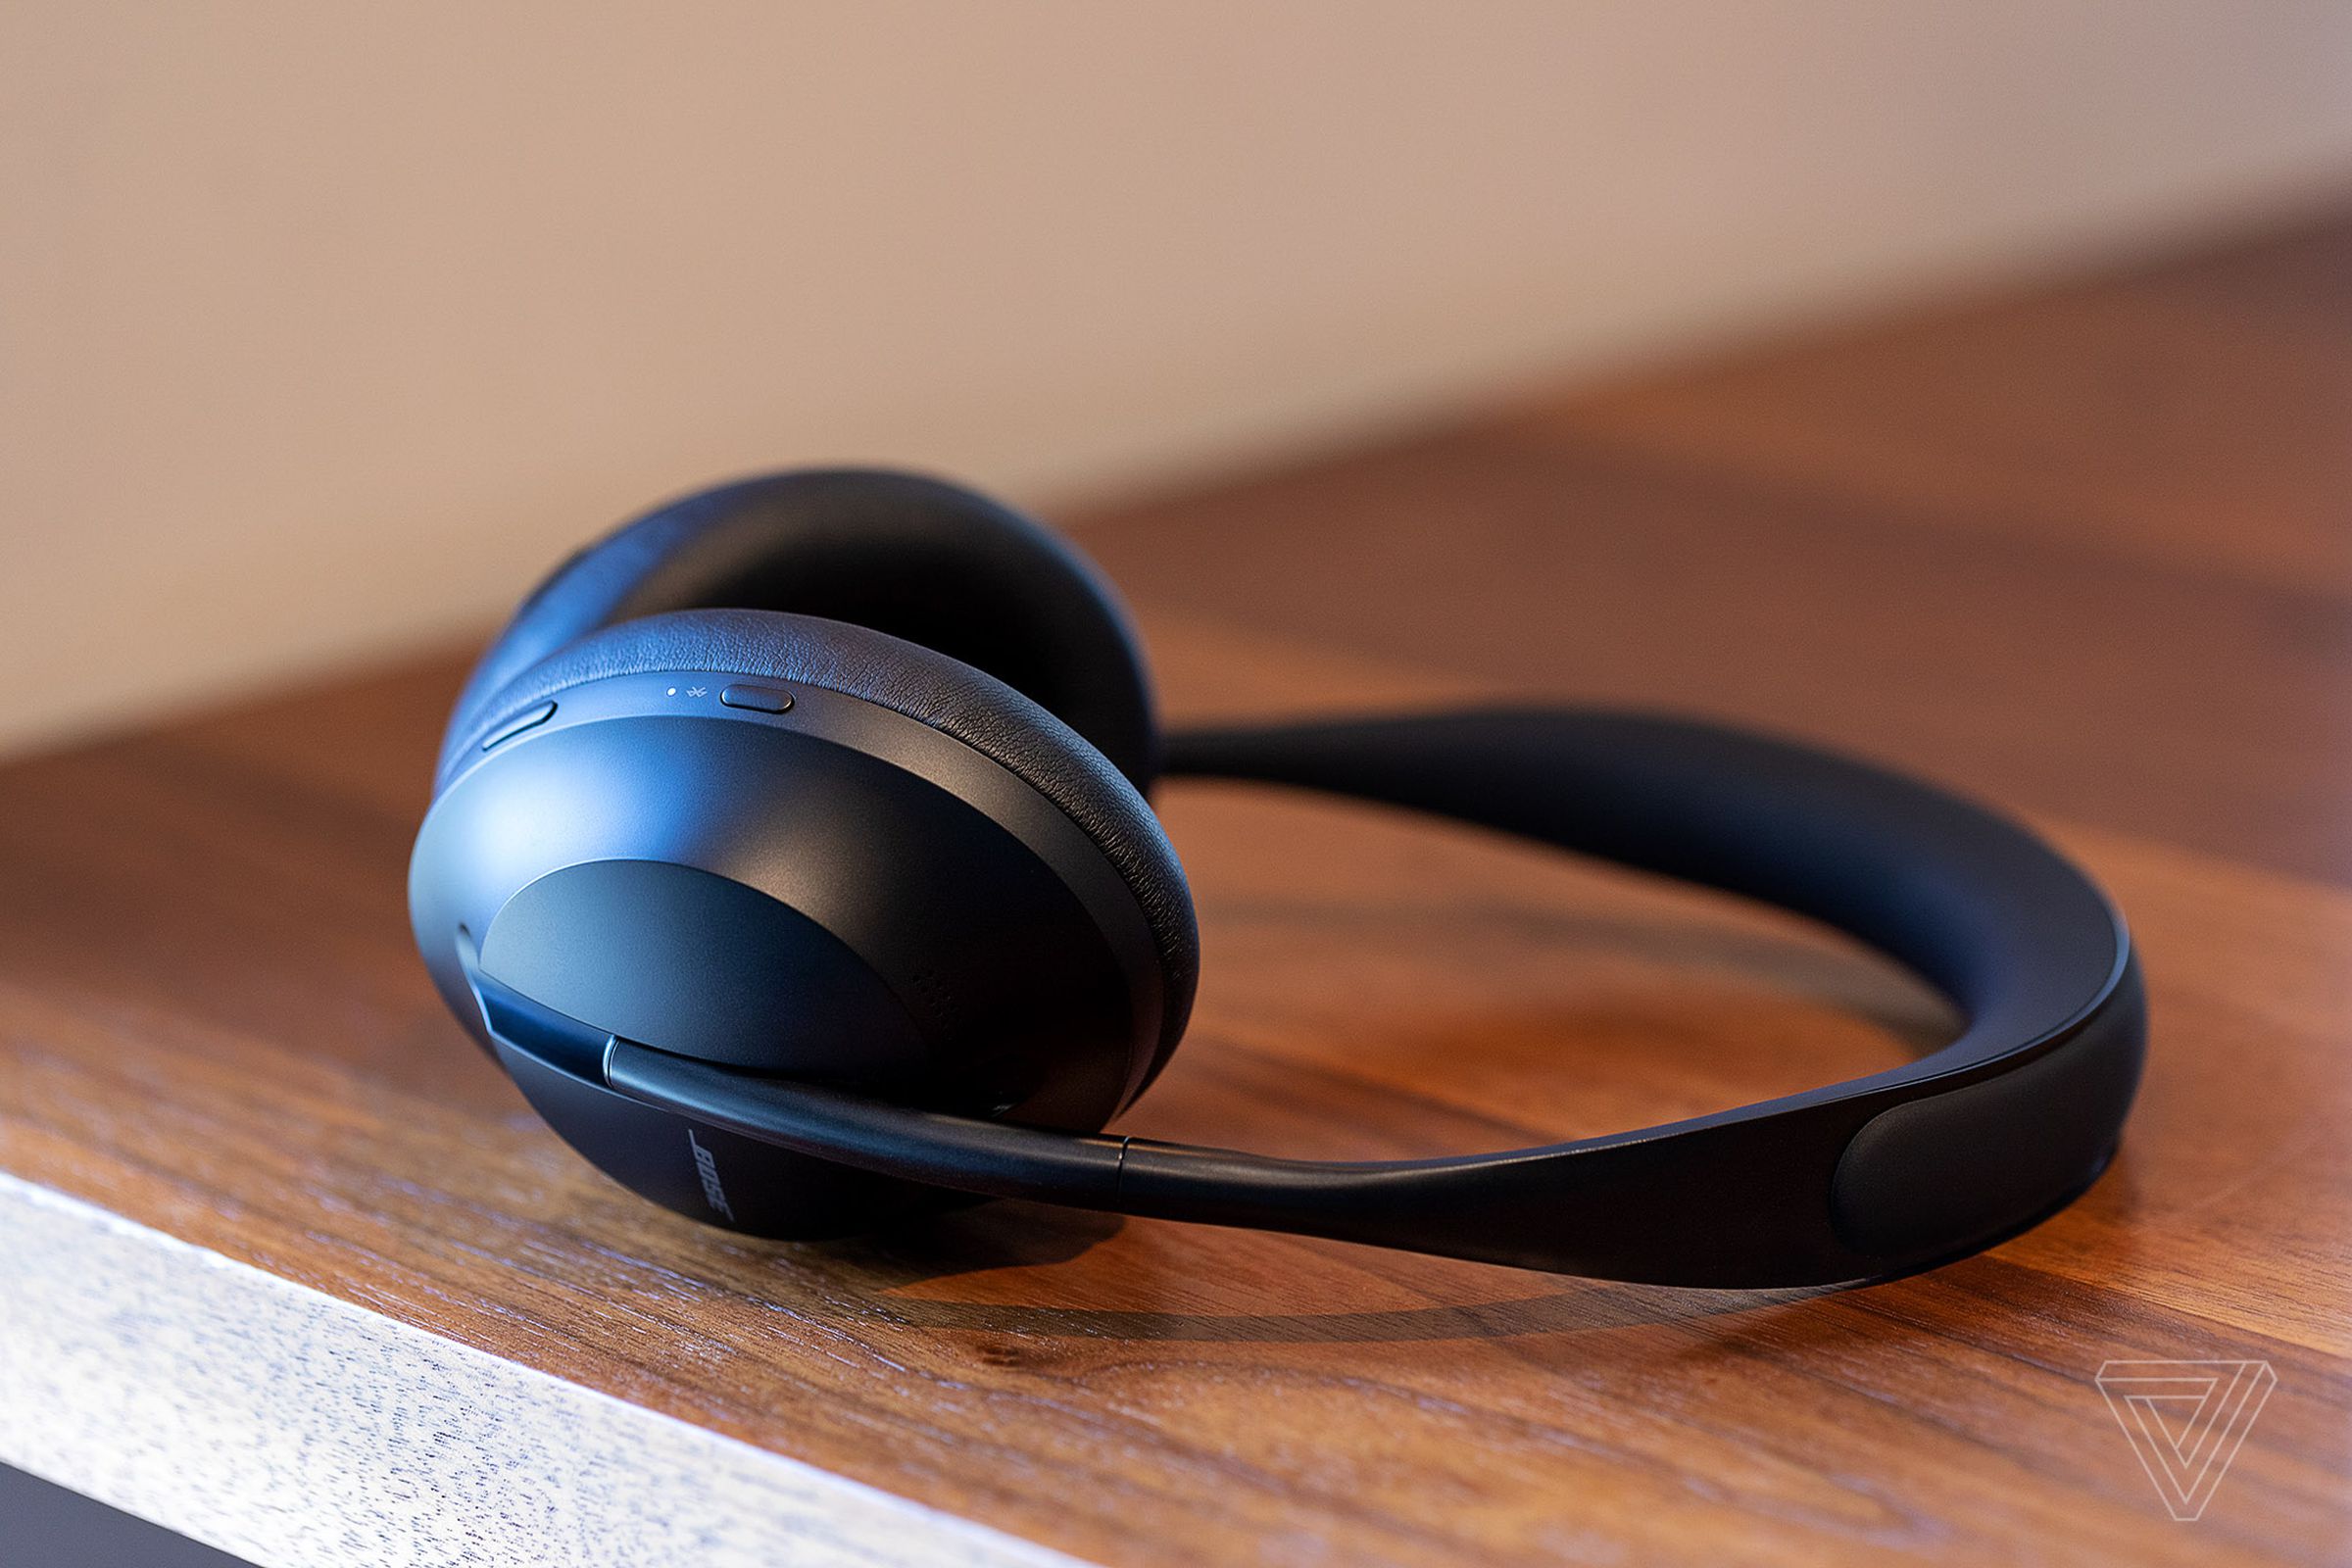 The Bose 700 offer some of the best noise cancellation you can get, especially for shy of $250.